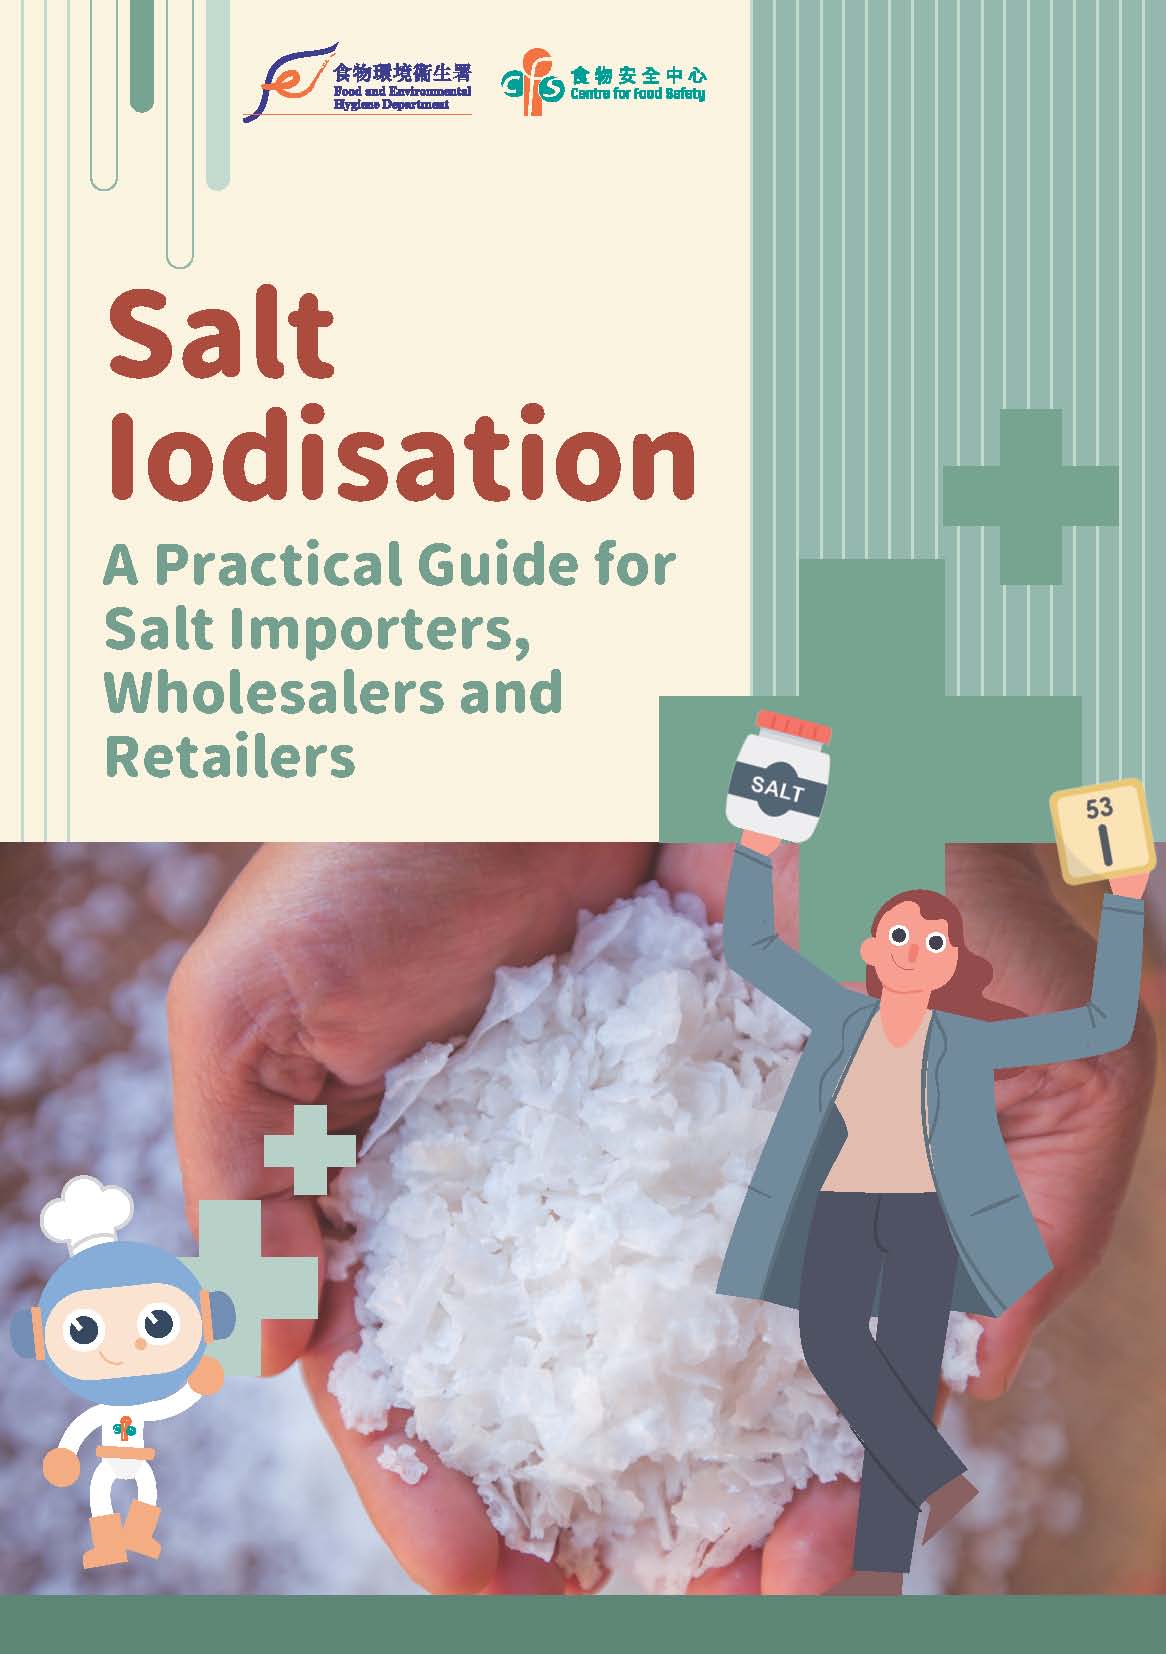 Salt Iodisation - A Practical Guide for Salt Importers, Wholesalers and Retailers